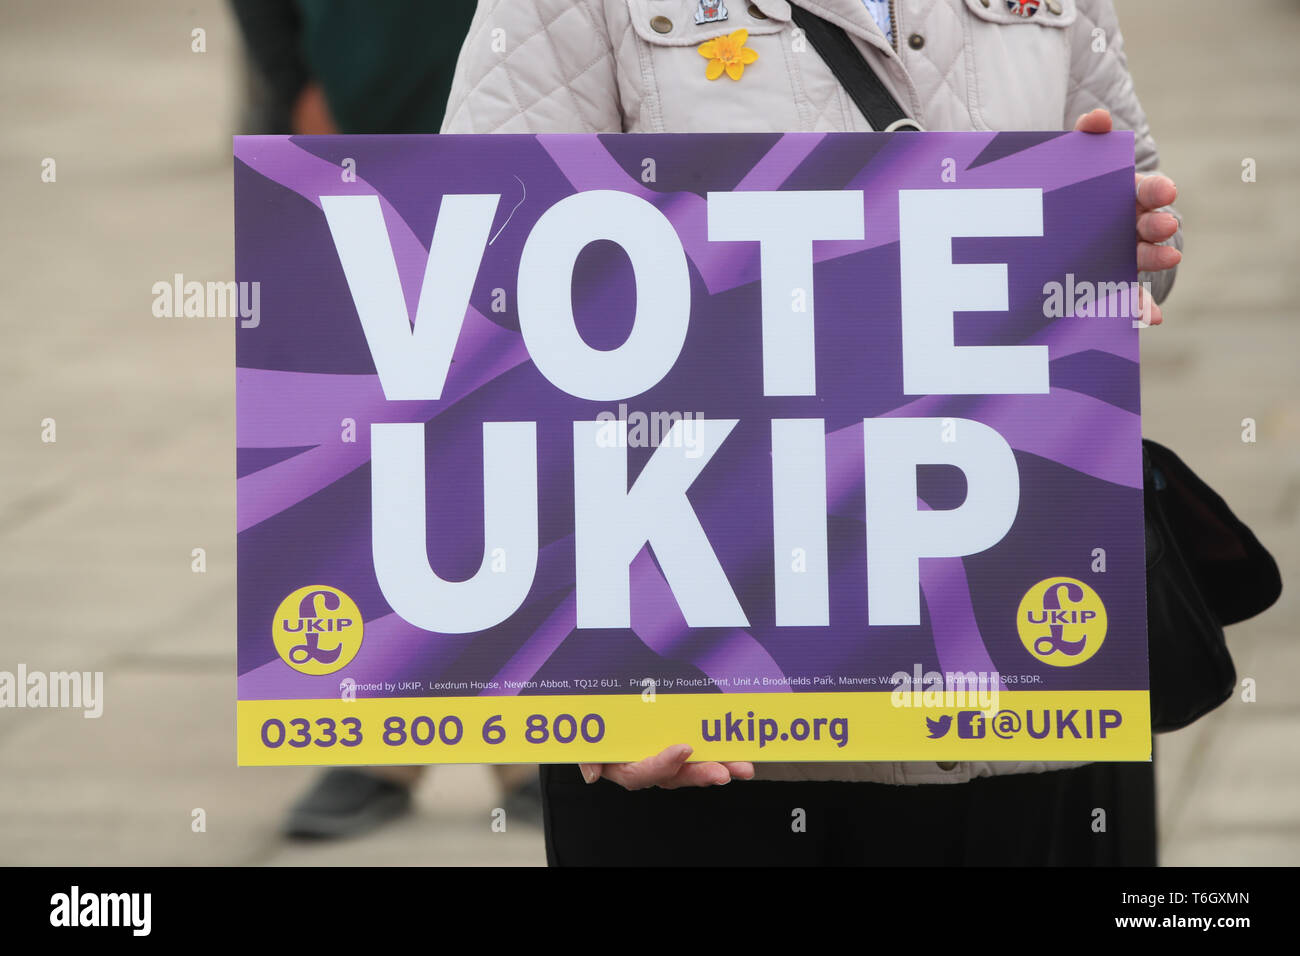 Voters gather ahead of Ukip's EU election campaign and manifesto launch at the Dorman Museum in Middlesbrough. Stock Photo